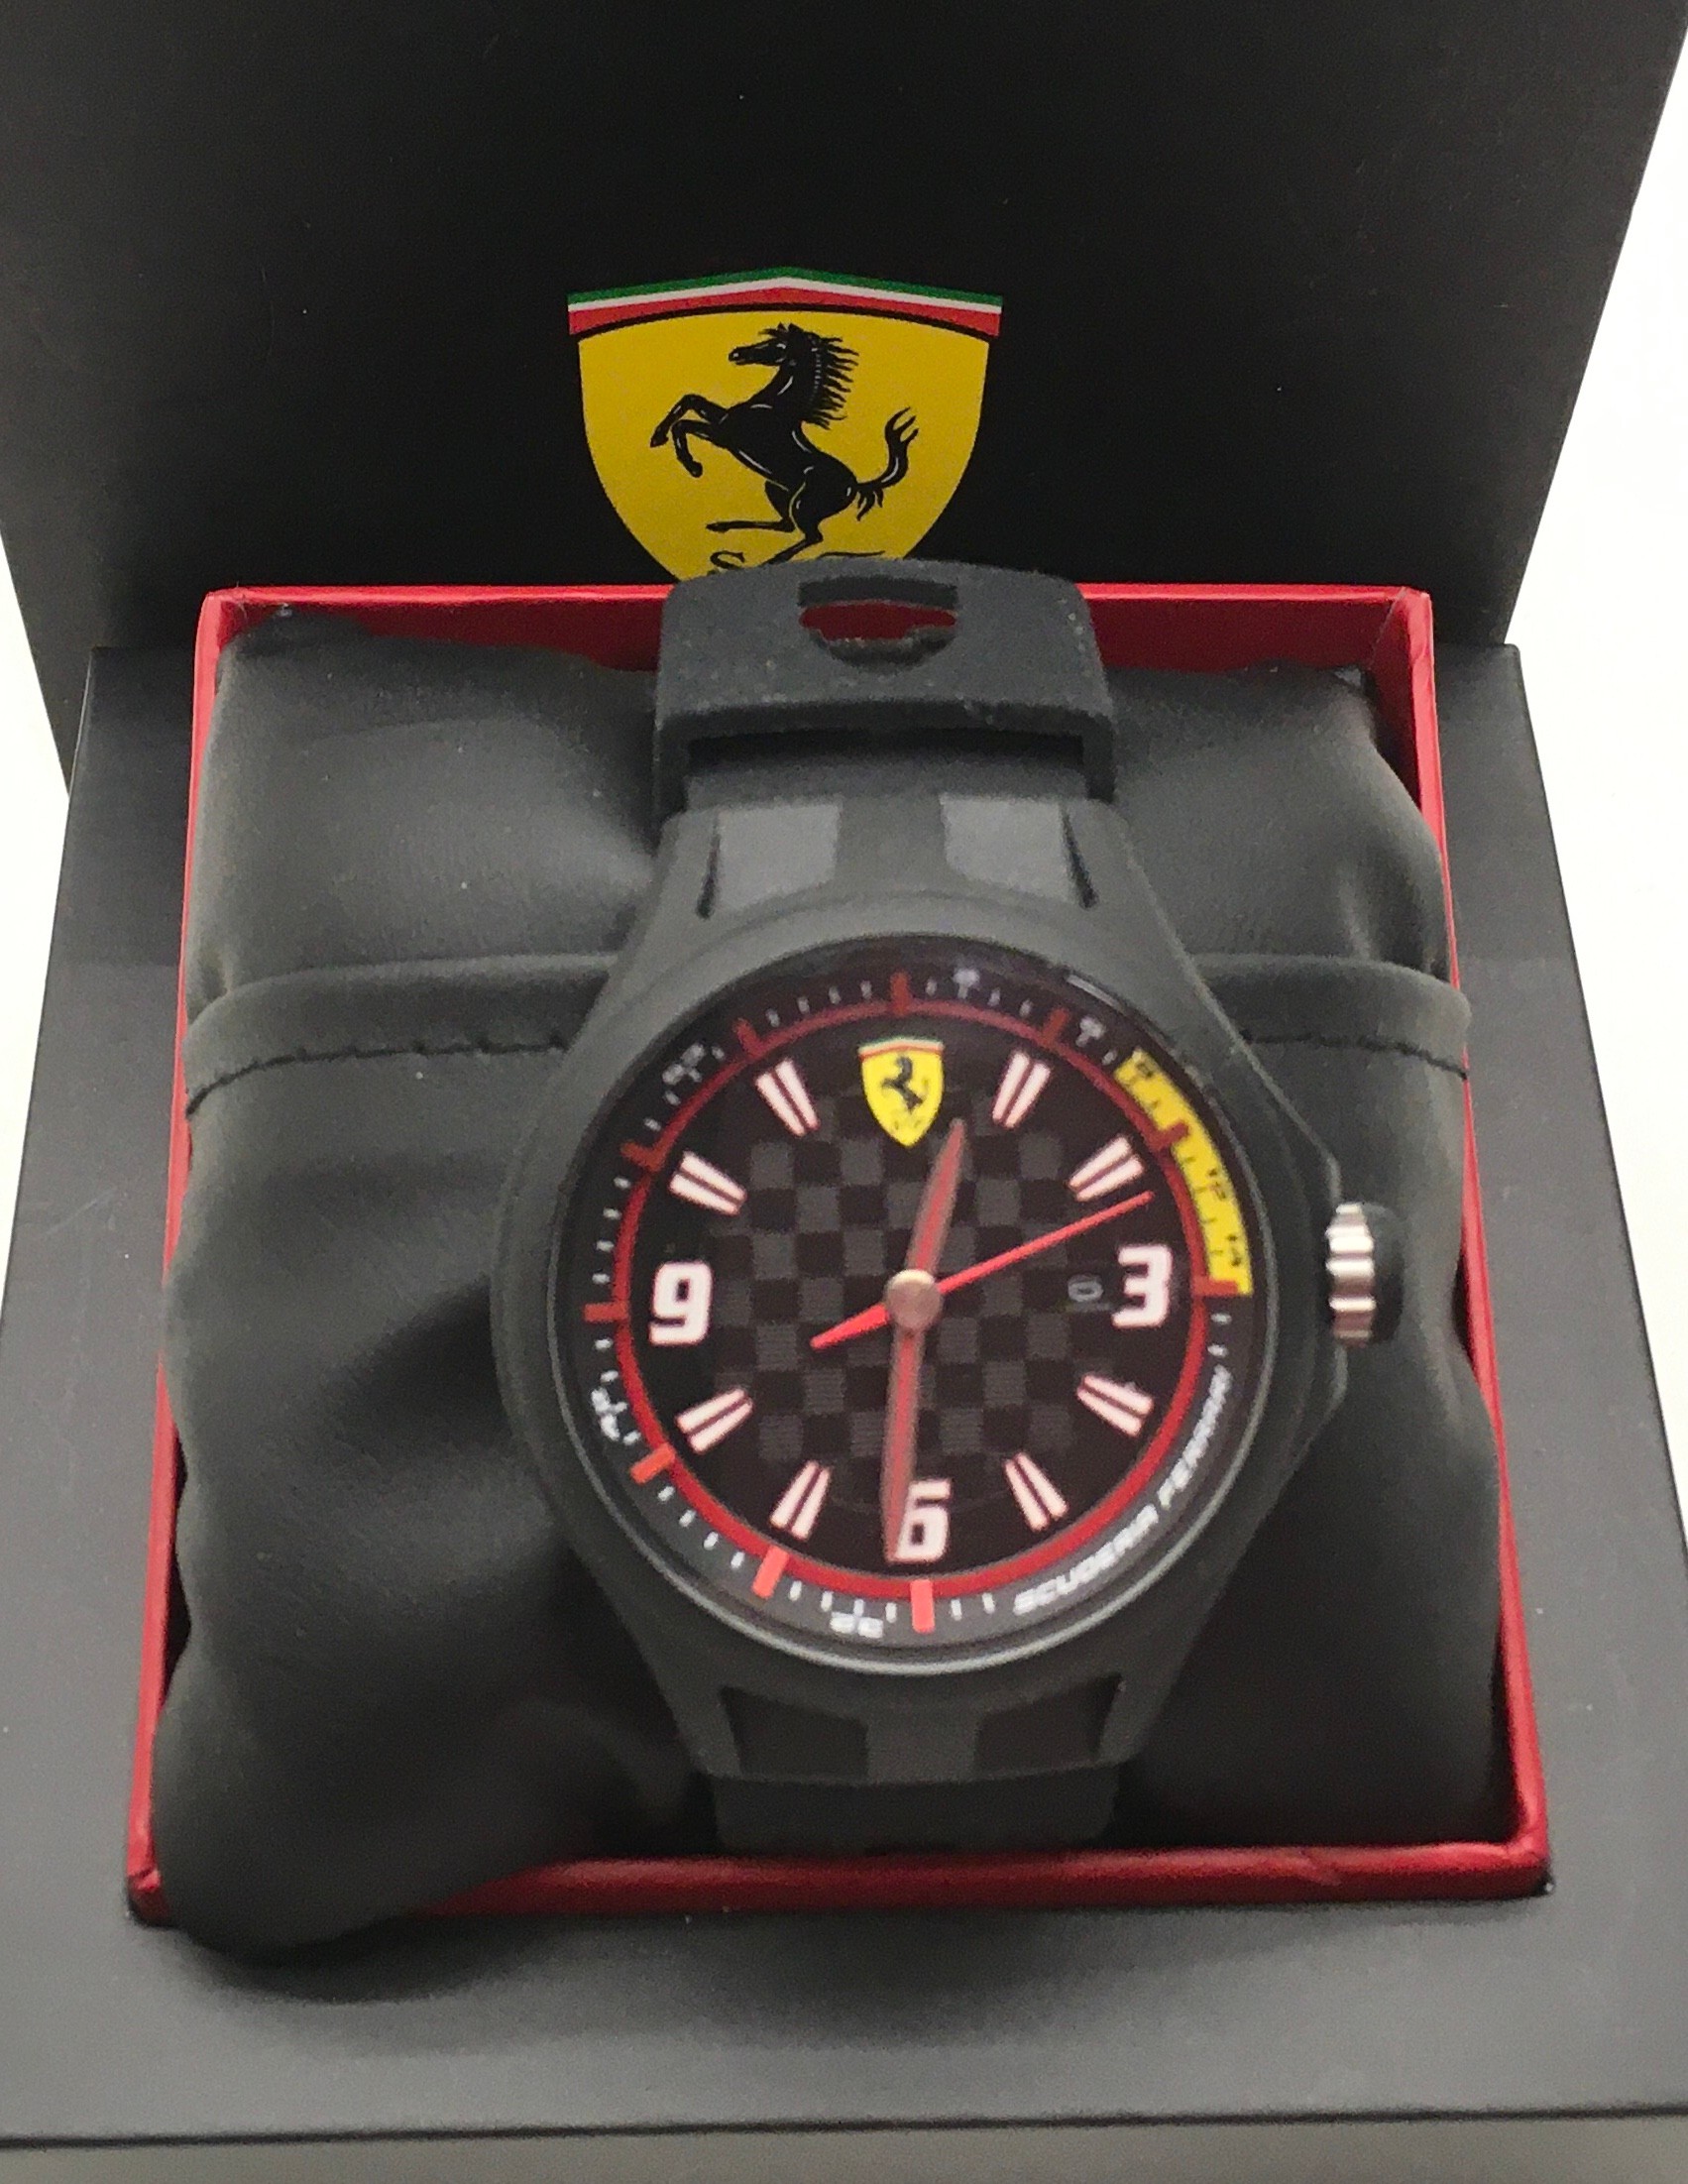 Collectible gents Ferrari quartz watch boxed with swing tags attached. Model ref SF.01.1.47.0070 - Image 2 of 2